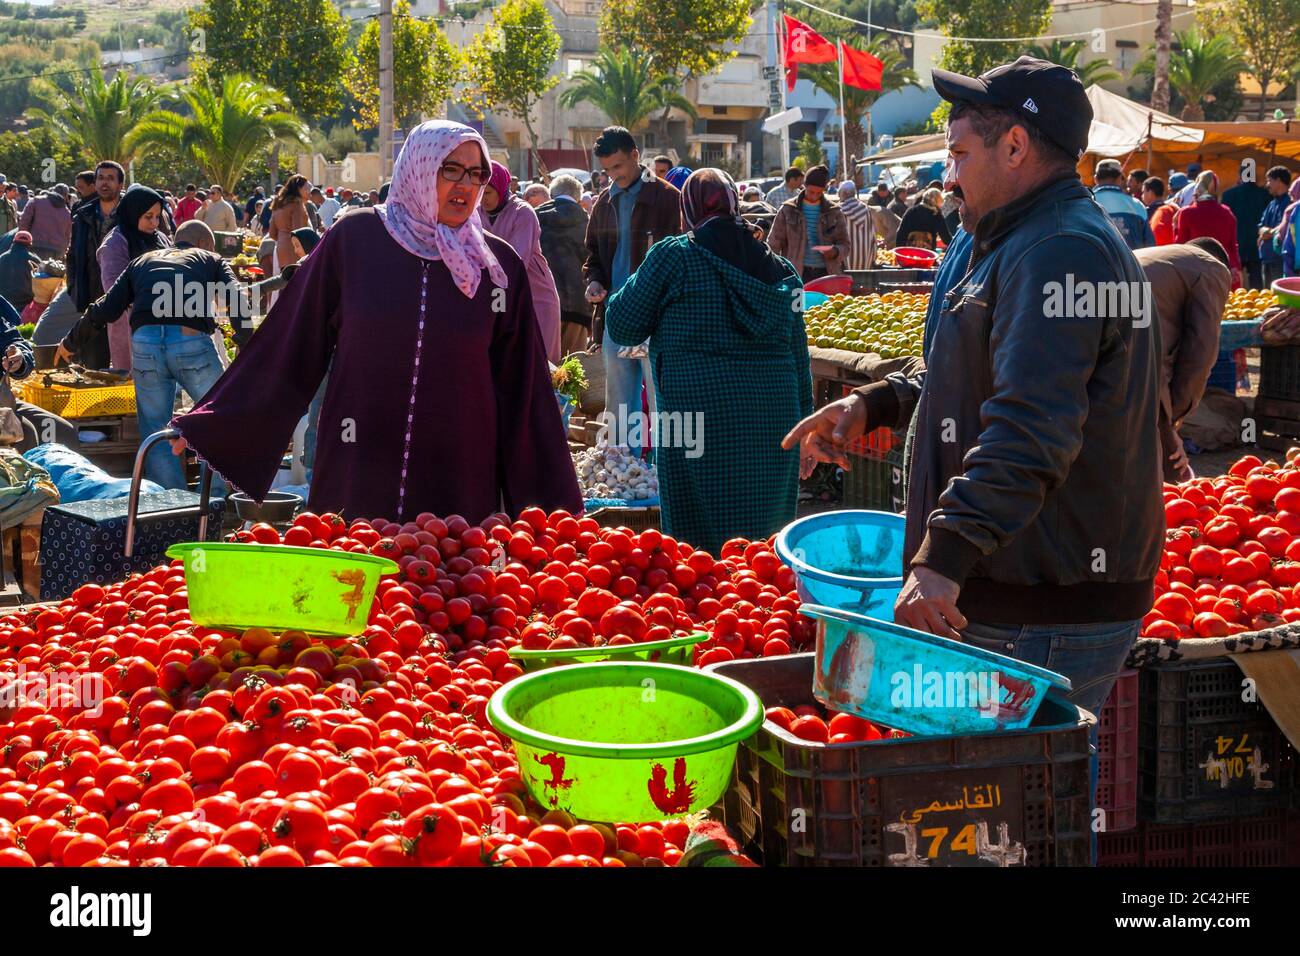 Impressions of Morocco: Tomatoes in the vegetable market Stock Photo